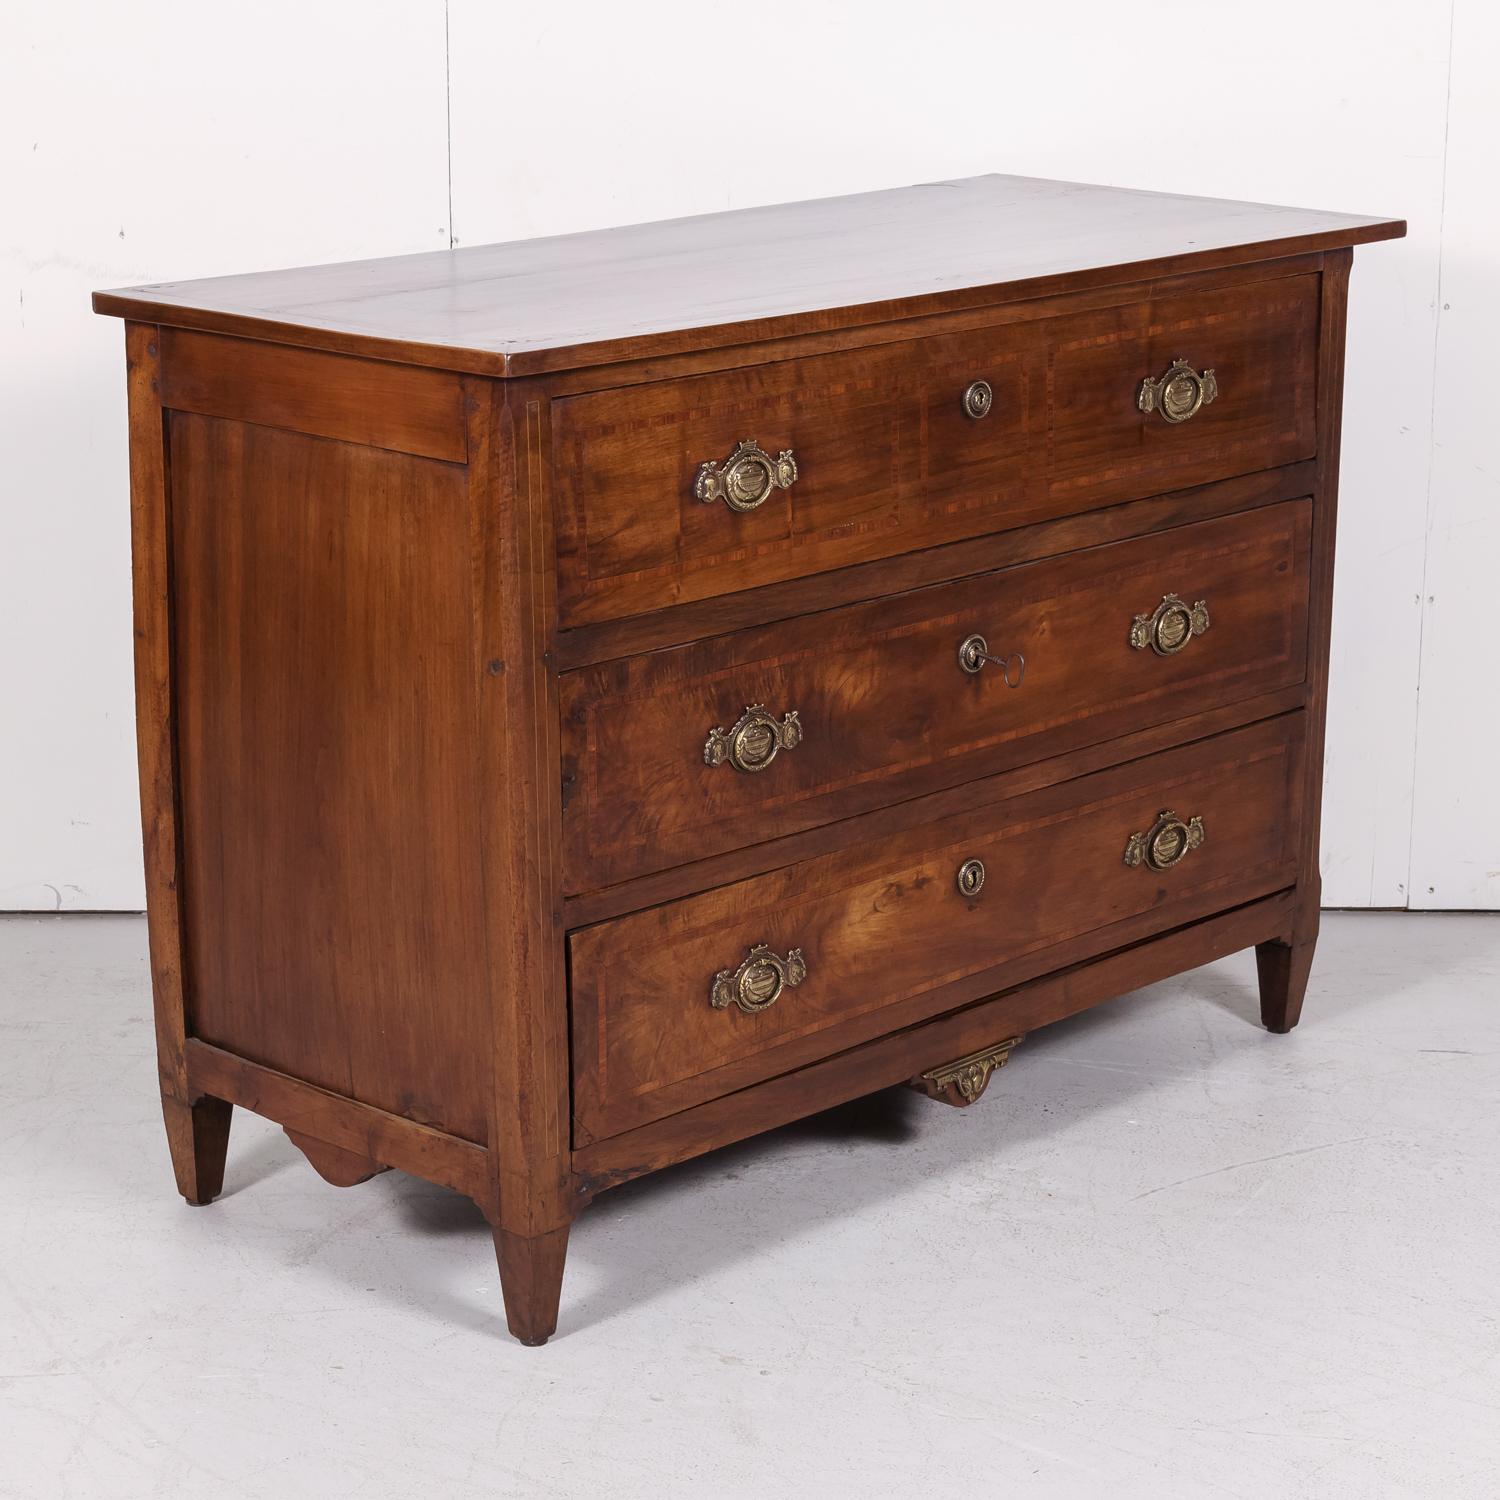 A fine 18th century French period Louis XVI commode in neoclassical form handcrafted of walnut with fruitwood parquetry by skilled artisans from Lyon, circa 1770s. Having a rectangular top sitting above three drawers adorned with original bronze